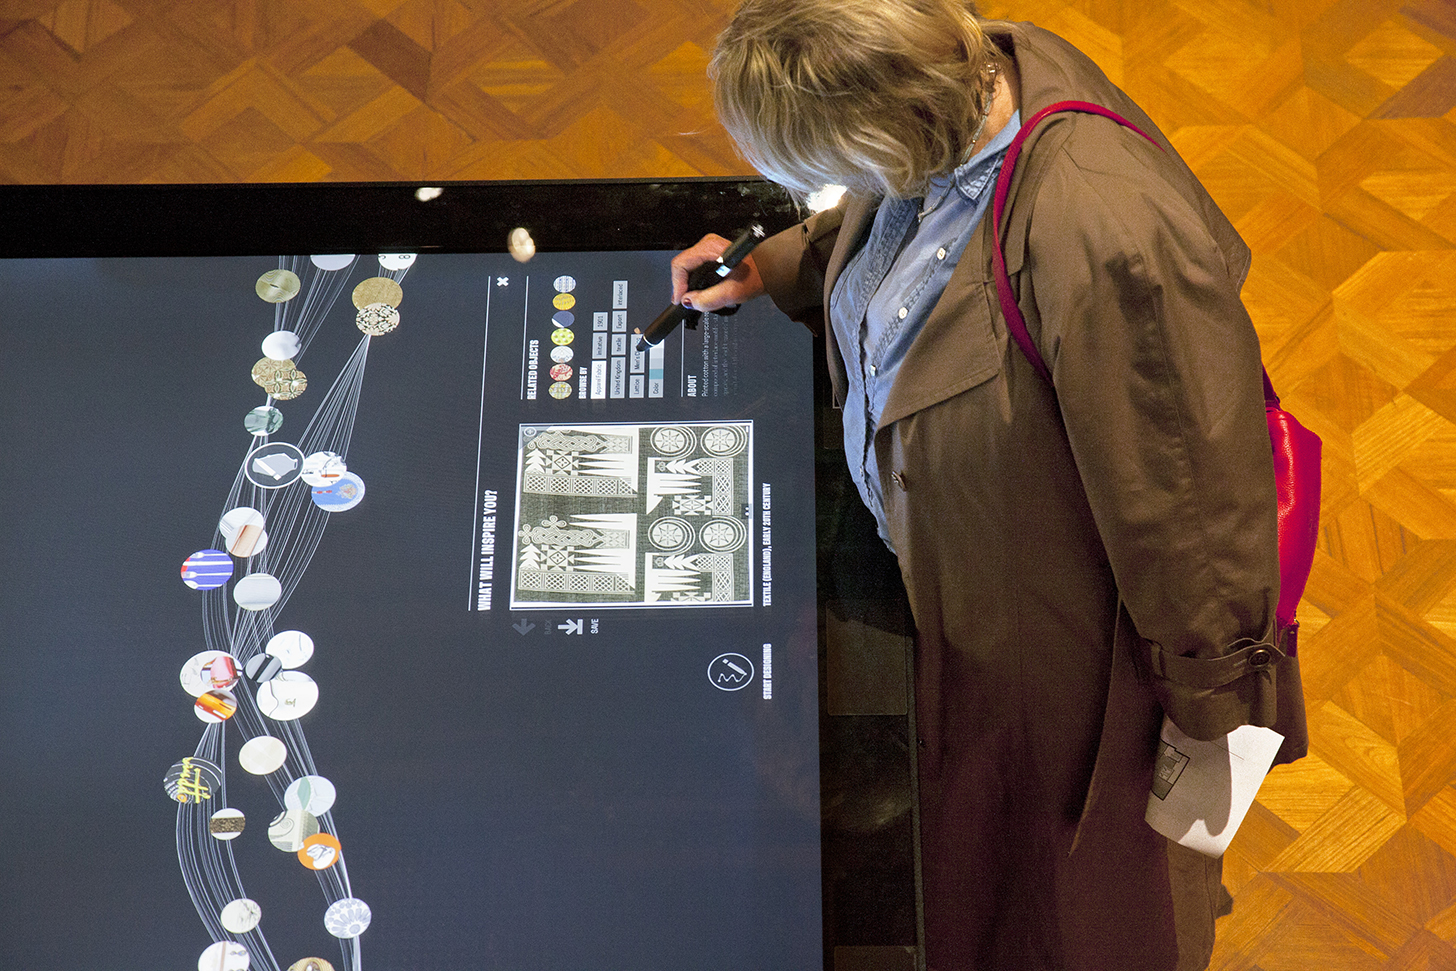 A museum visitor looking at an image on the Digital Table. Photo by Matt Flynn.